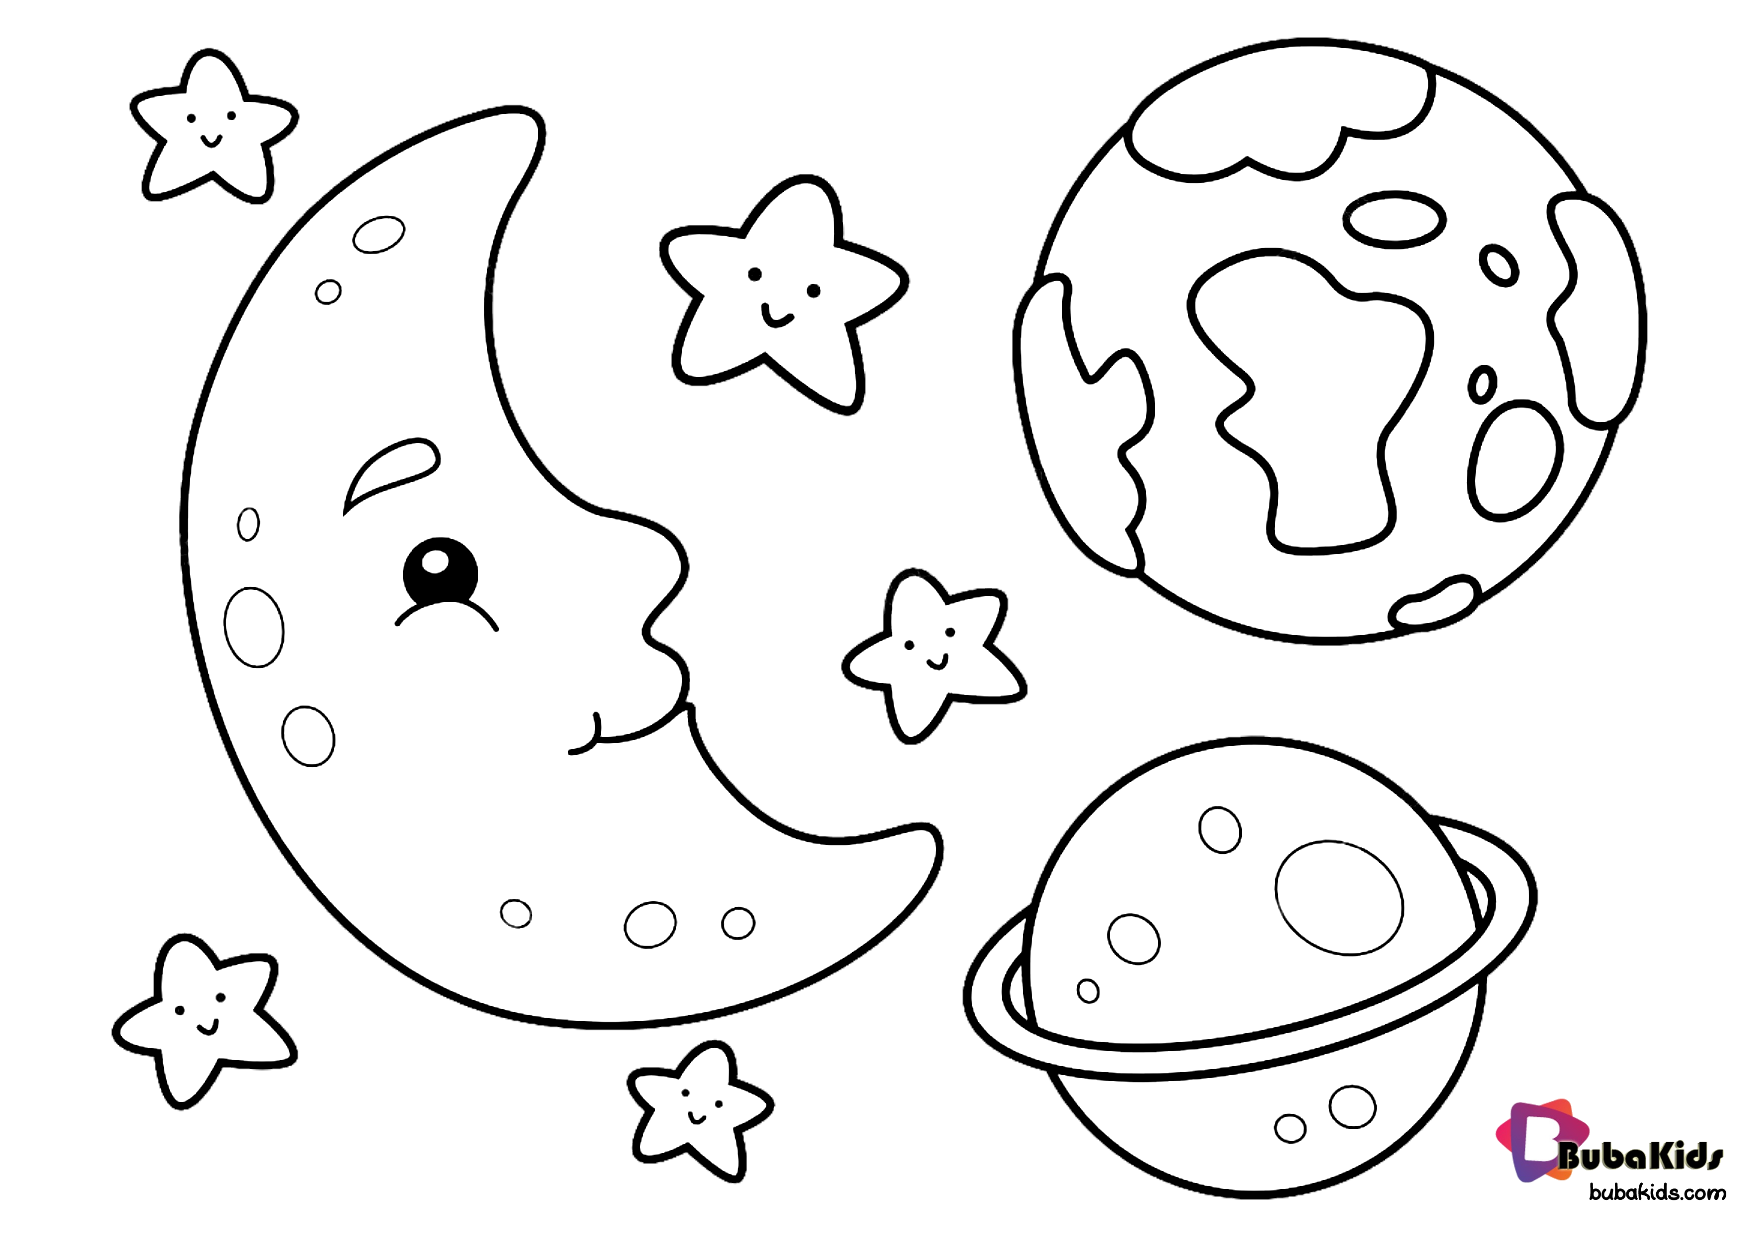 Moon earth stars and saturn outer space coloring page for toddlers Wallpaper